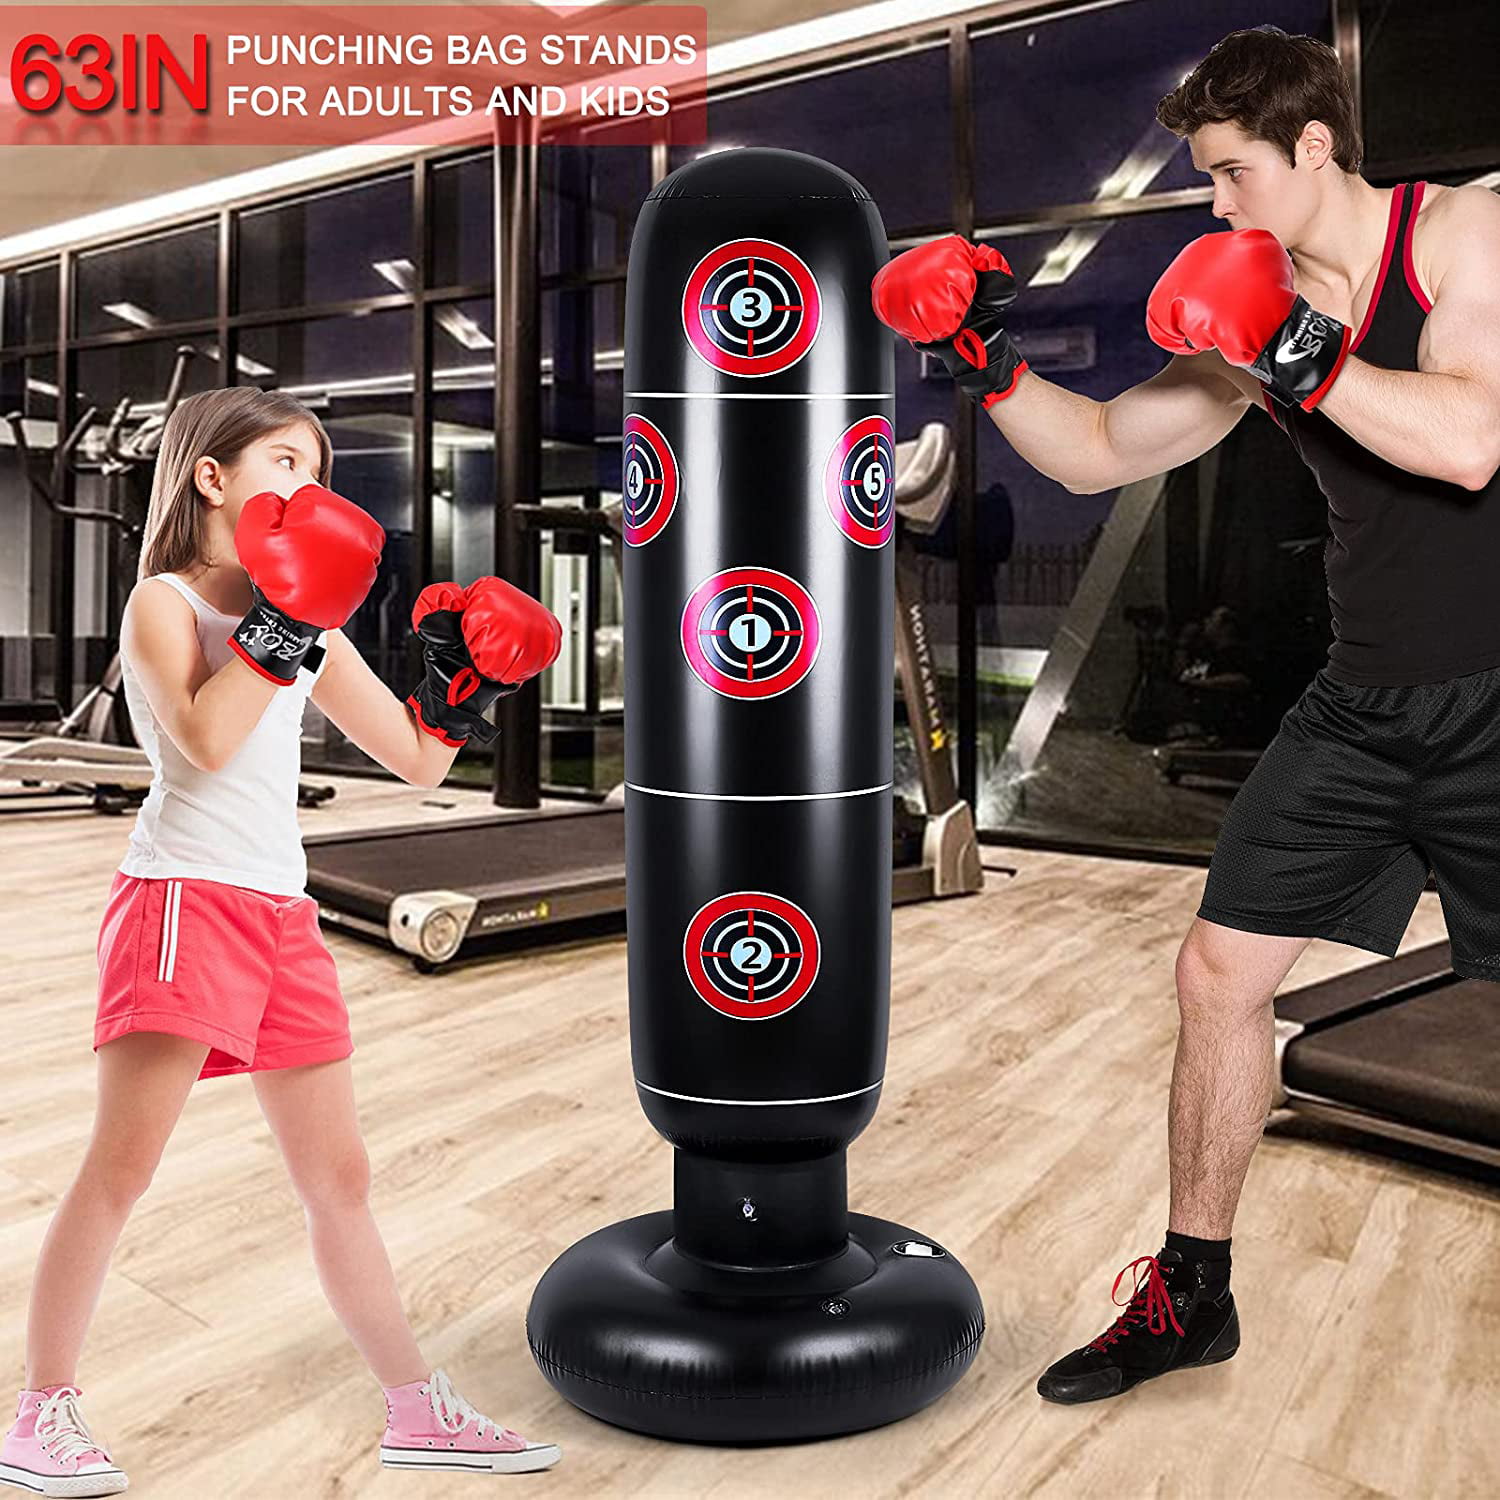 AK KYC Inflatable Punching Bag for Kids 63 inch Home Training Equipment Free Standing Punching Bag Boxing Bag Fitness Punching Bag for Karate Taekwondo Kick and Hits Training 